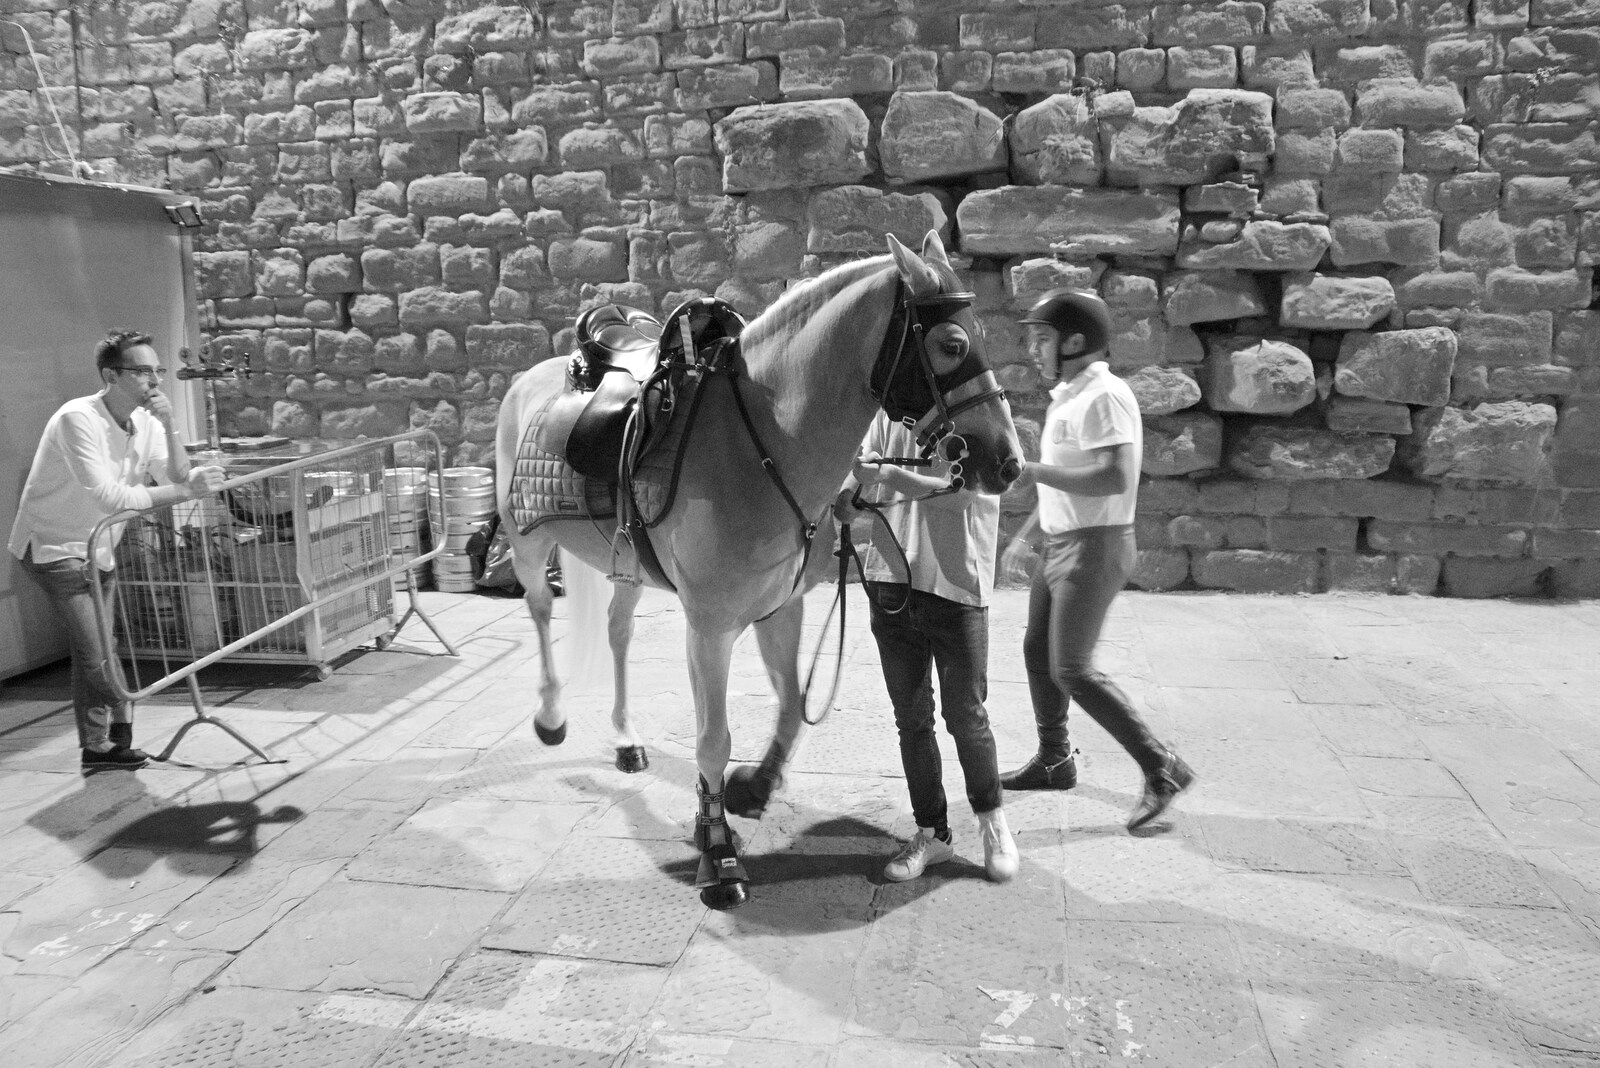 A Day by the Pool and a Festival Rehearsal, Arezzo, Italy - 3rd September 2022: A jousting horse clops around on Via Colcitrone